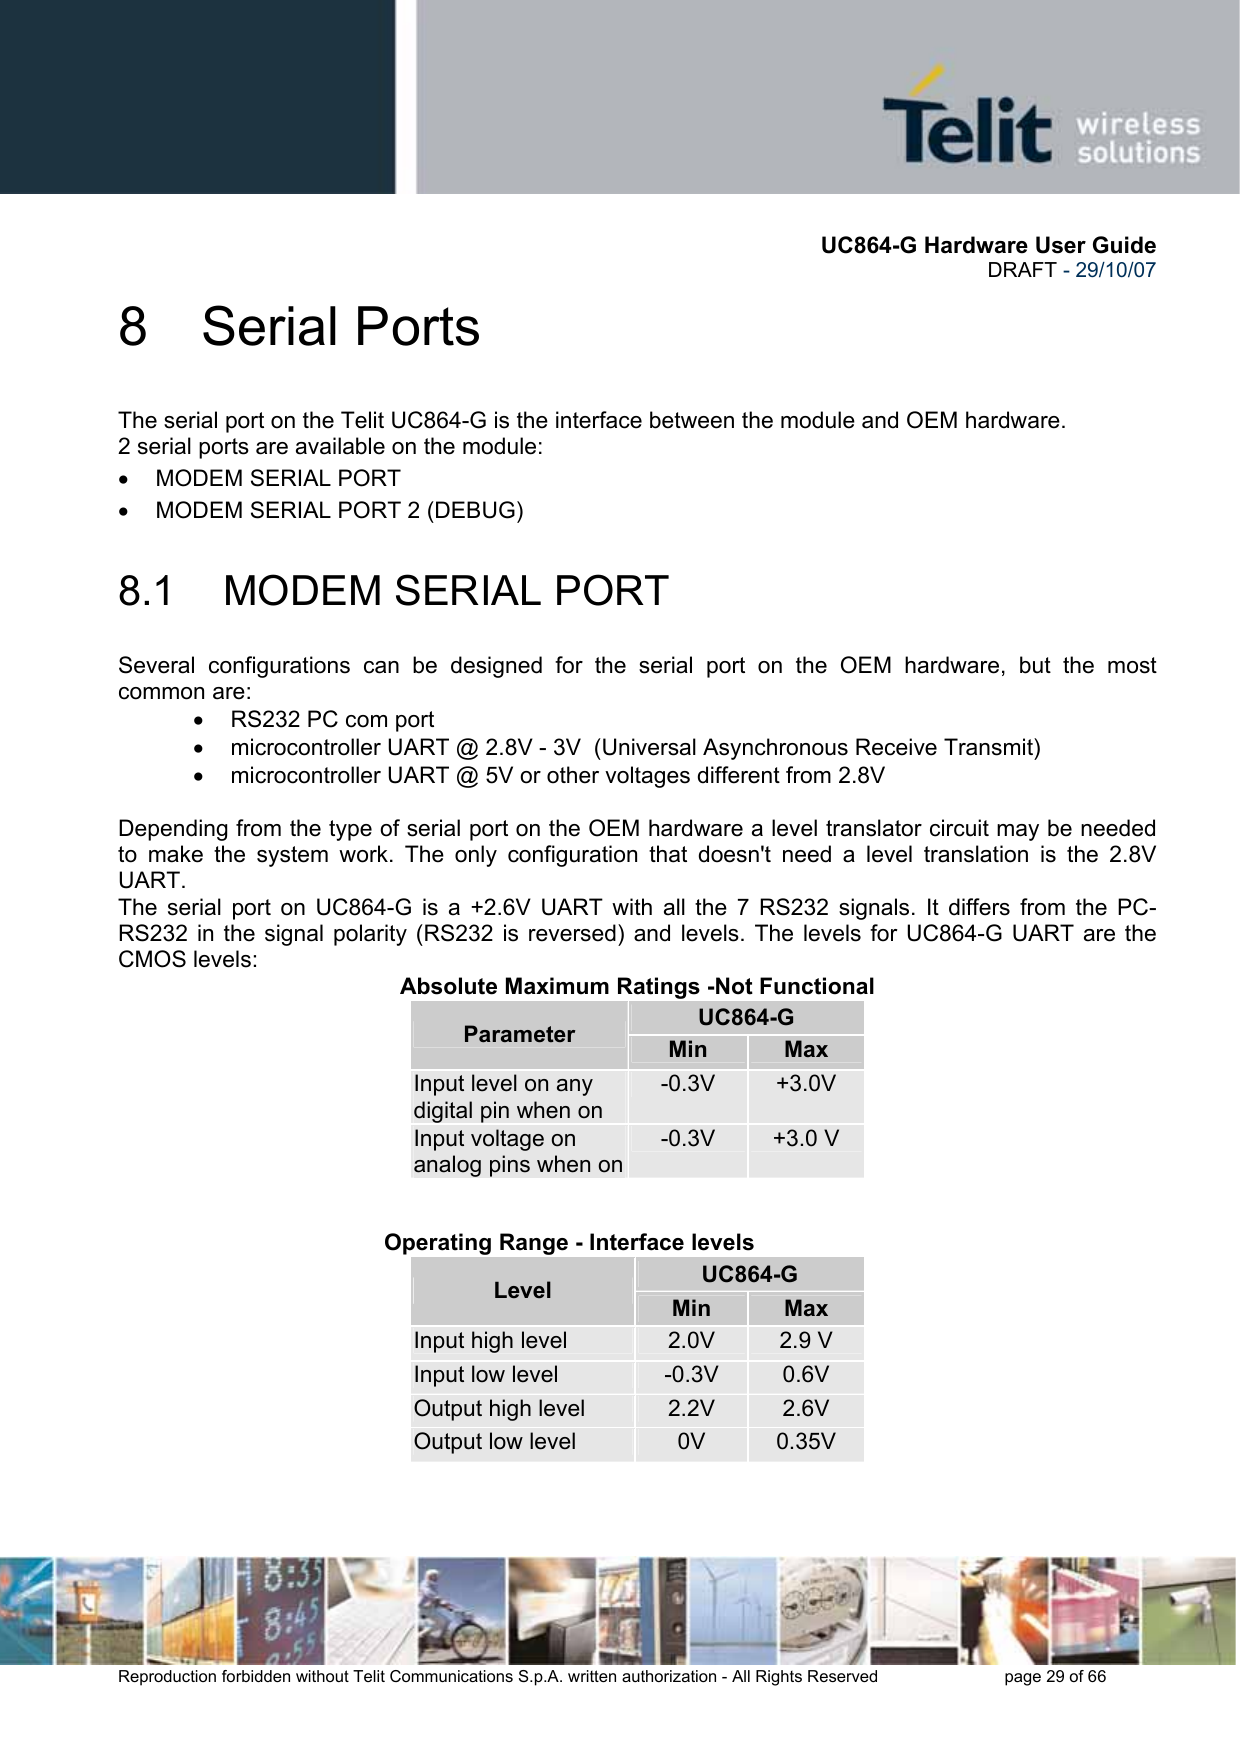       UC864-G Hardware User Guide  DRAFT - 29/10/07      Reproduction forbidden without Telit Communications S.p.A. written authorization - All Rights Reserved    page 29 of 66  8 Serial Ports The serial port on the Telit UC864-G is the interface between the module and OEM hardware.  2 serial ports are available on the module: •  MODEM SERIAL PORT •  MODEM SERIAL PORT 2 (DEBUG)  8.1 MODEM SERIAL PORT Several configurations can be designed for the serial port on the OEM hardware, but the most common are: •  RS232 PC com port •  microcontroller UART @ 2.8V - 3V  (Universal Asynchronous Receive Transmit)  •  microcontroller UART @ 5V or other voltages different from 2.8V   Depending from the type of serial port on the OEM hardware a level translator circuit may be needed to make the system work. The only configuration that doesn&apos;t need a level translation is the 2.8V UART. The serial port on UC864-G is a +2.6V UART with all the 7 RS232 signals. It differs from the PC-RS232 in the signal polarity (RS232 is reversed) and levels. The levels for UC864-G UART are the CMOS levels: Absolute Maximum Ratings -Not Functional UC864-G Parameter  Min  Max Input level on any digital pin when on -0.3V  +3.0V Input voltage on analog pins when on-0.3V  +3.0 V      Operating Range - Interface levels  UC864-G Level  Min  Max Input high level  2.0V  2.9 V Input low level  -0.3V  0.6V Output high level  2.2V  2.6V Output low level  0V  0.35V    